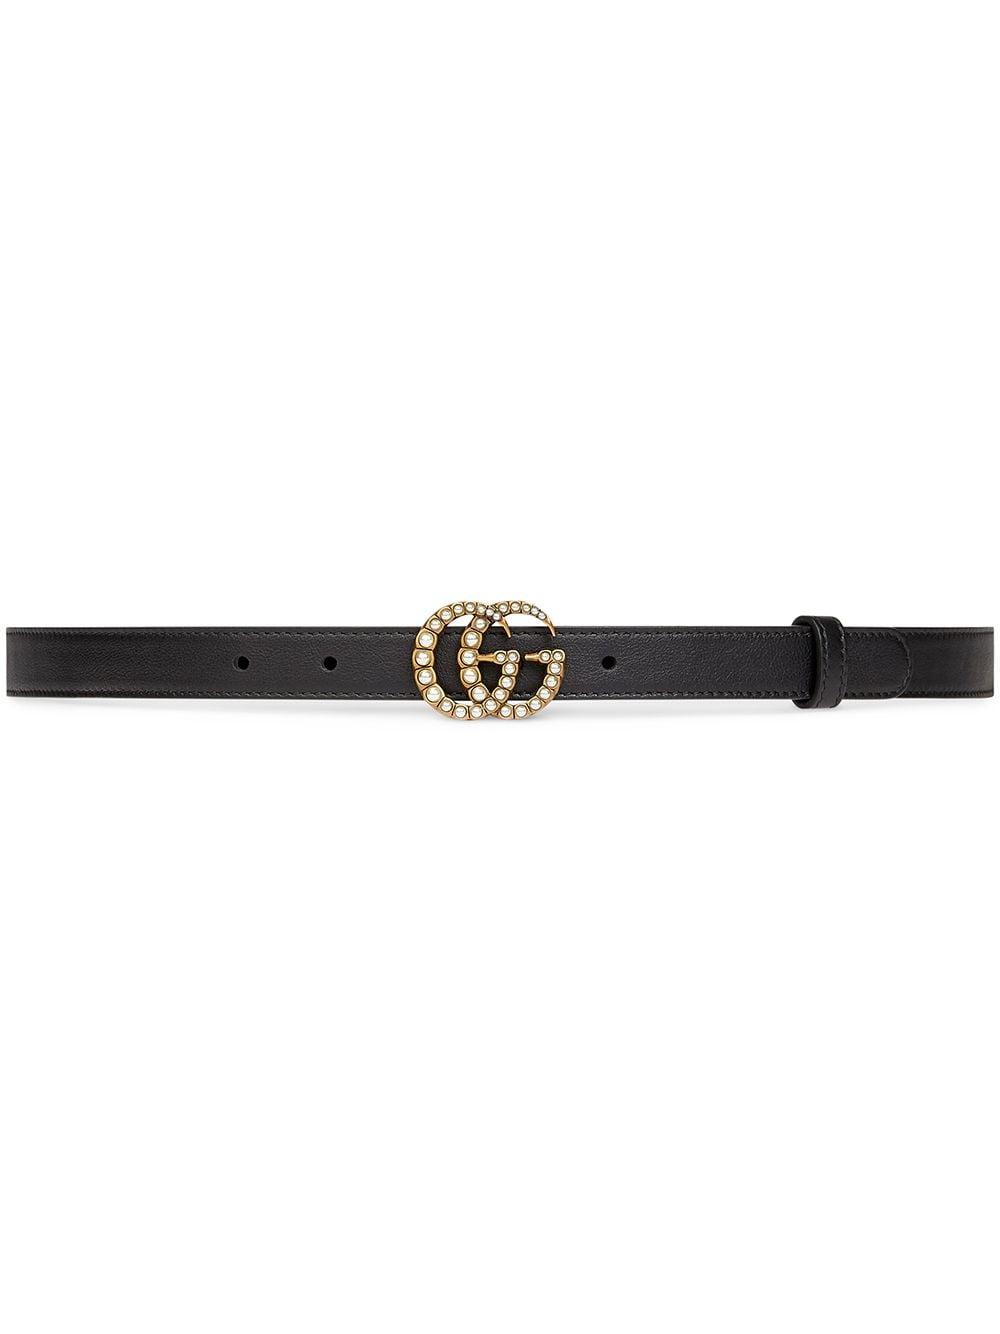 Gucci Leather Belt With Pearl Double G Buckle in Black - Save 63% | Lyst